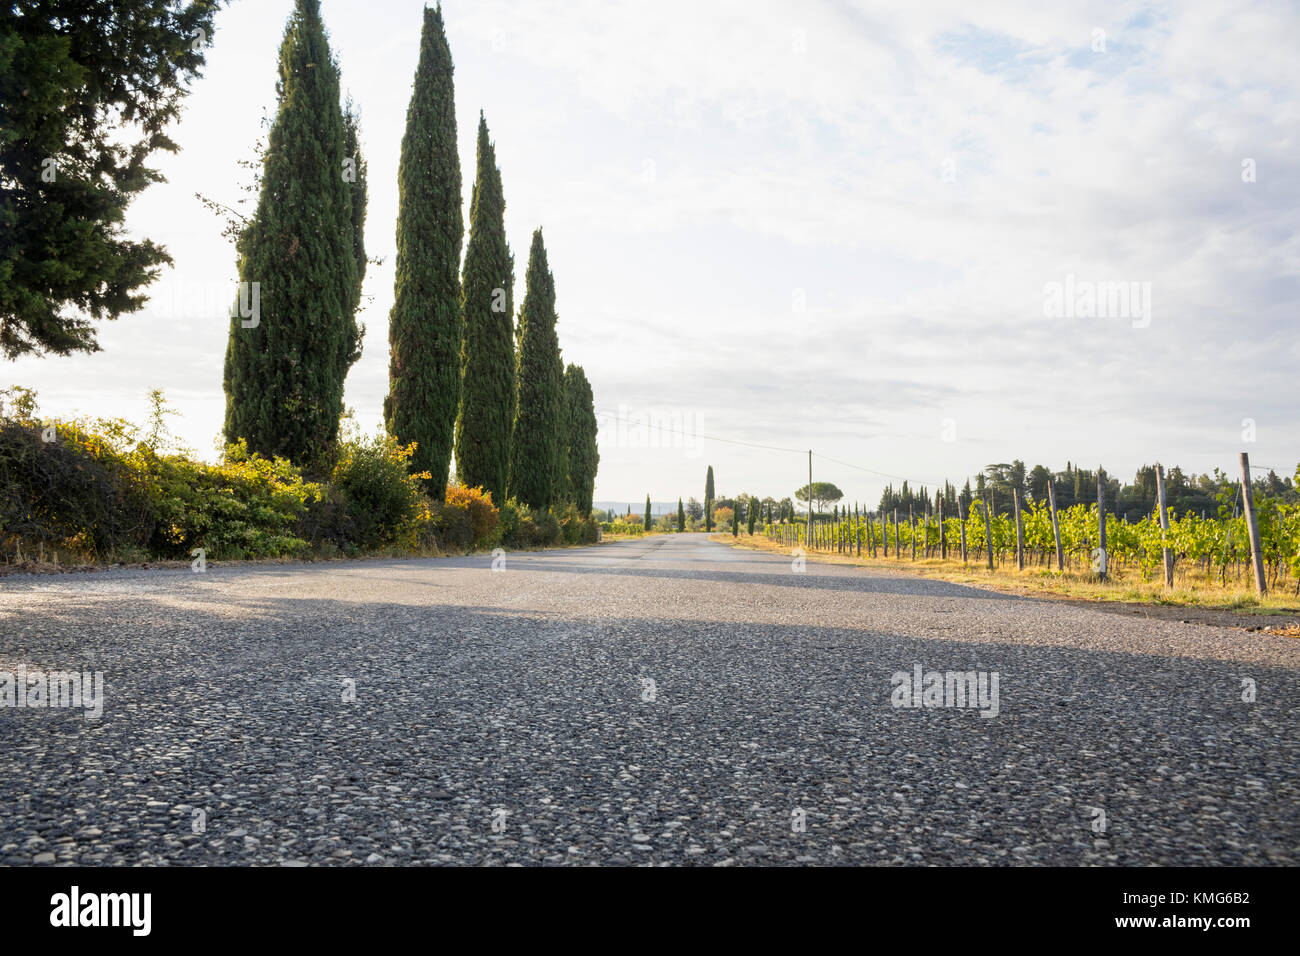 Row of cypress trees on a road in Tuscany, Italy Stock Photo